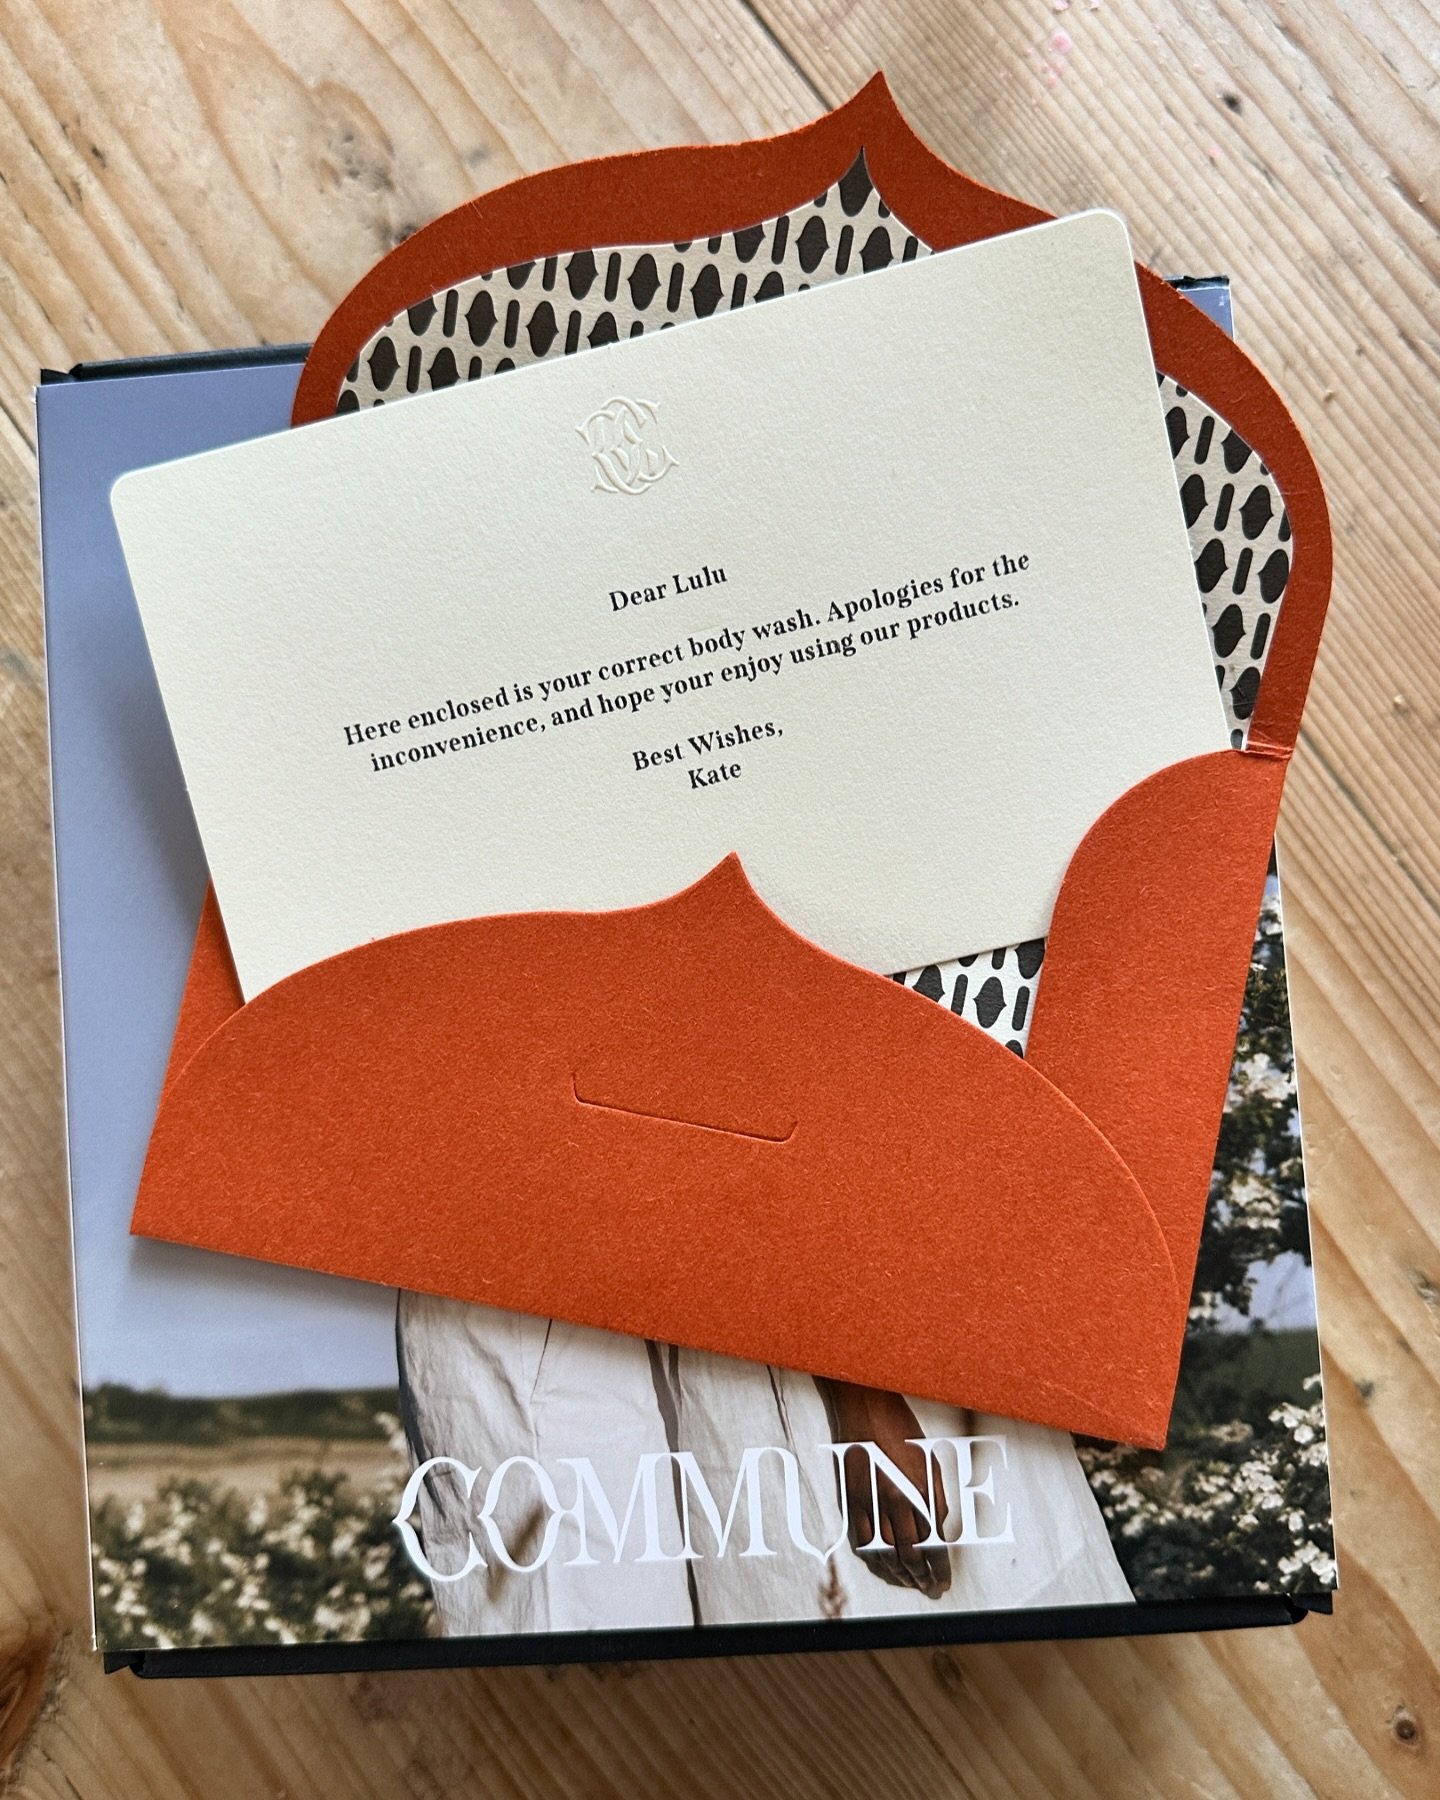 Shout out to @commune.cc for possibly the best ever customer service I have received. I ordered the body wash and was sent the body cream. I emailed them on Saturday to advise them of the mistake. I received a reply within 3 minutes from Kate apologi